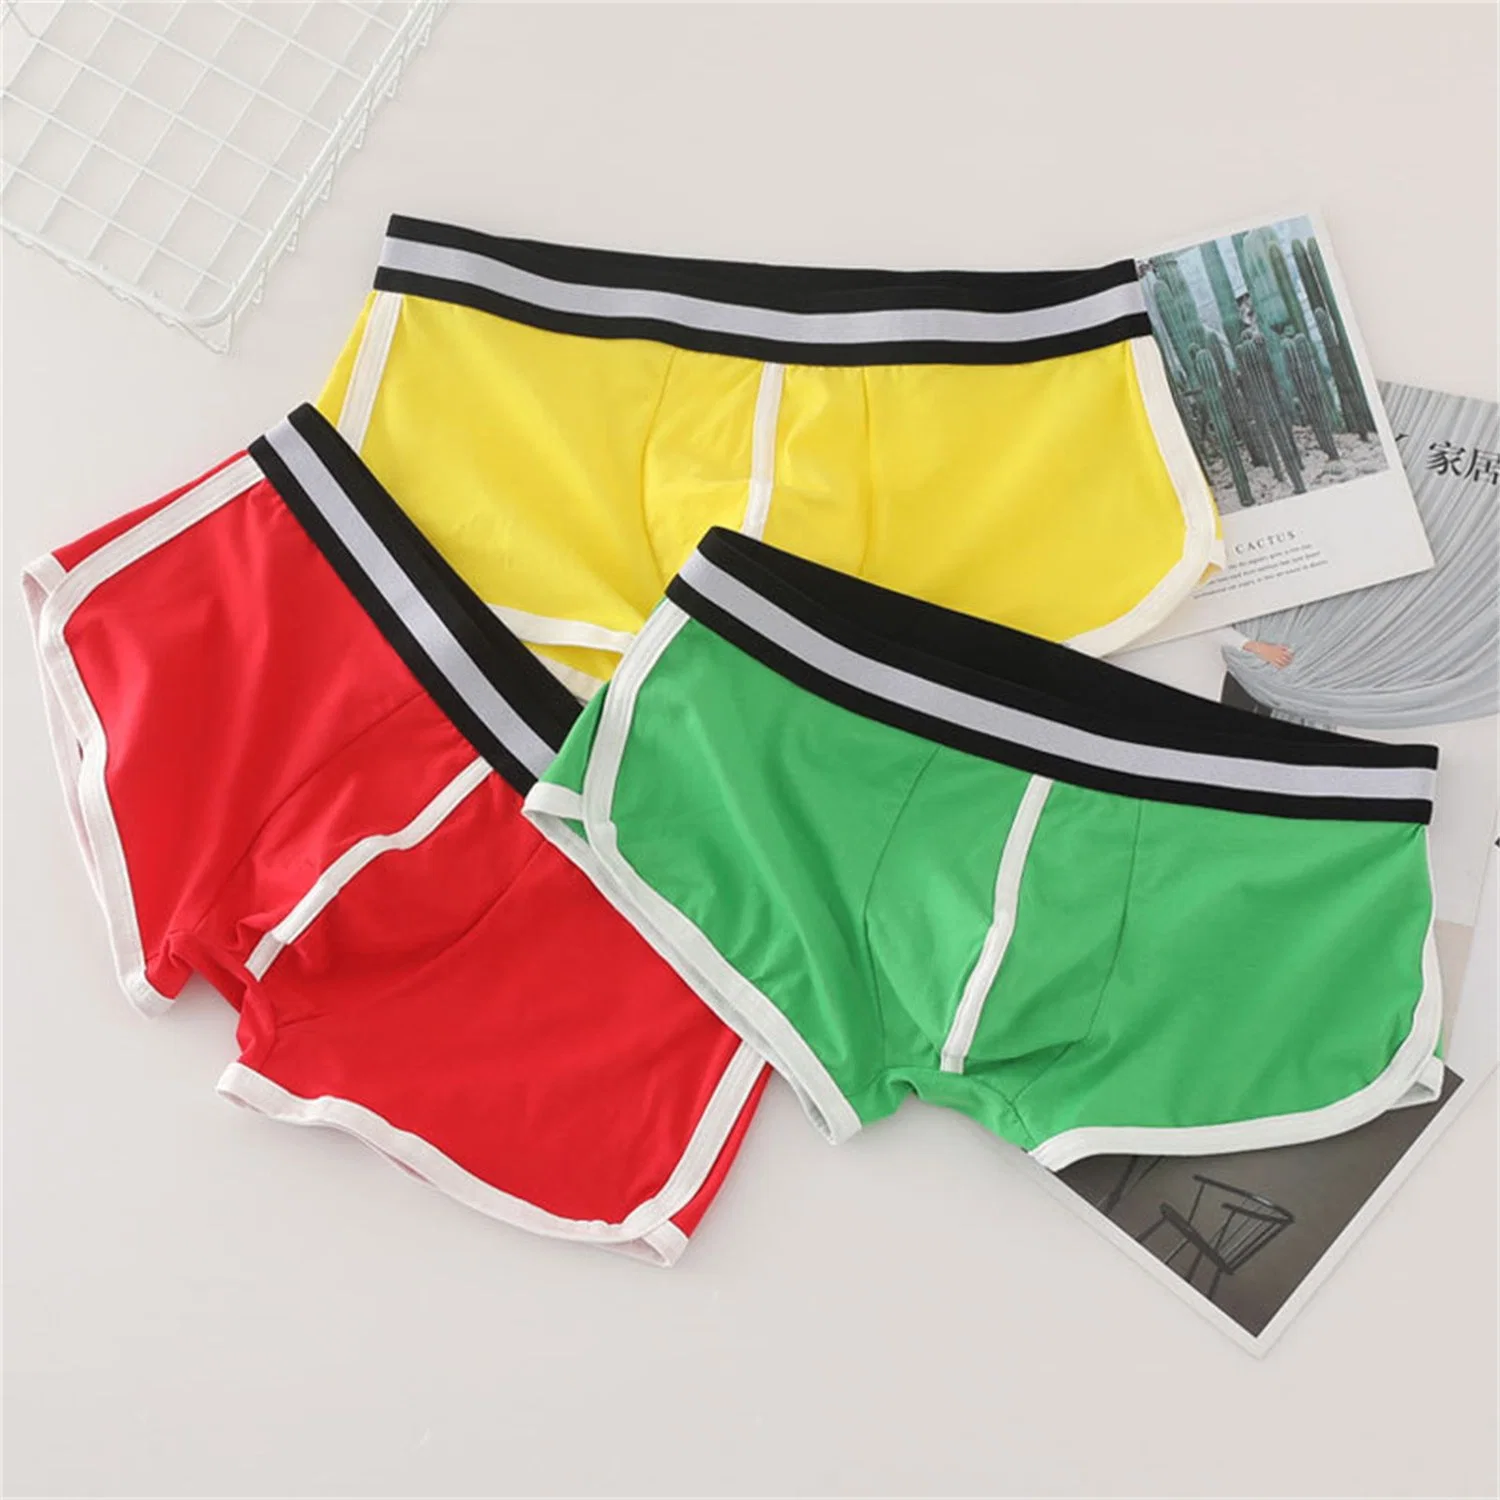 Underwear Manufacturer OEM Wholesale Plus Size Elastic Underpants Sexy Comfortable Splicing Briefs Breathable Mens Boxer Shorts with Eco Permit